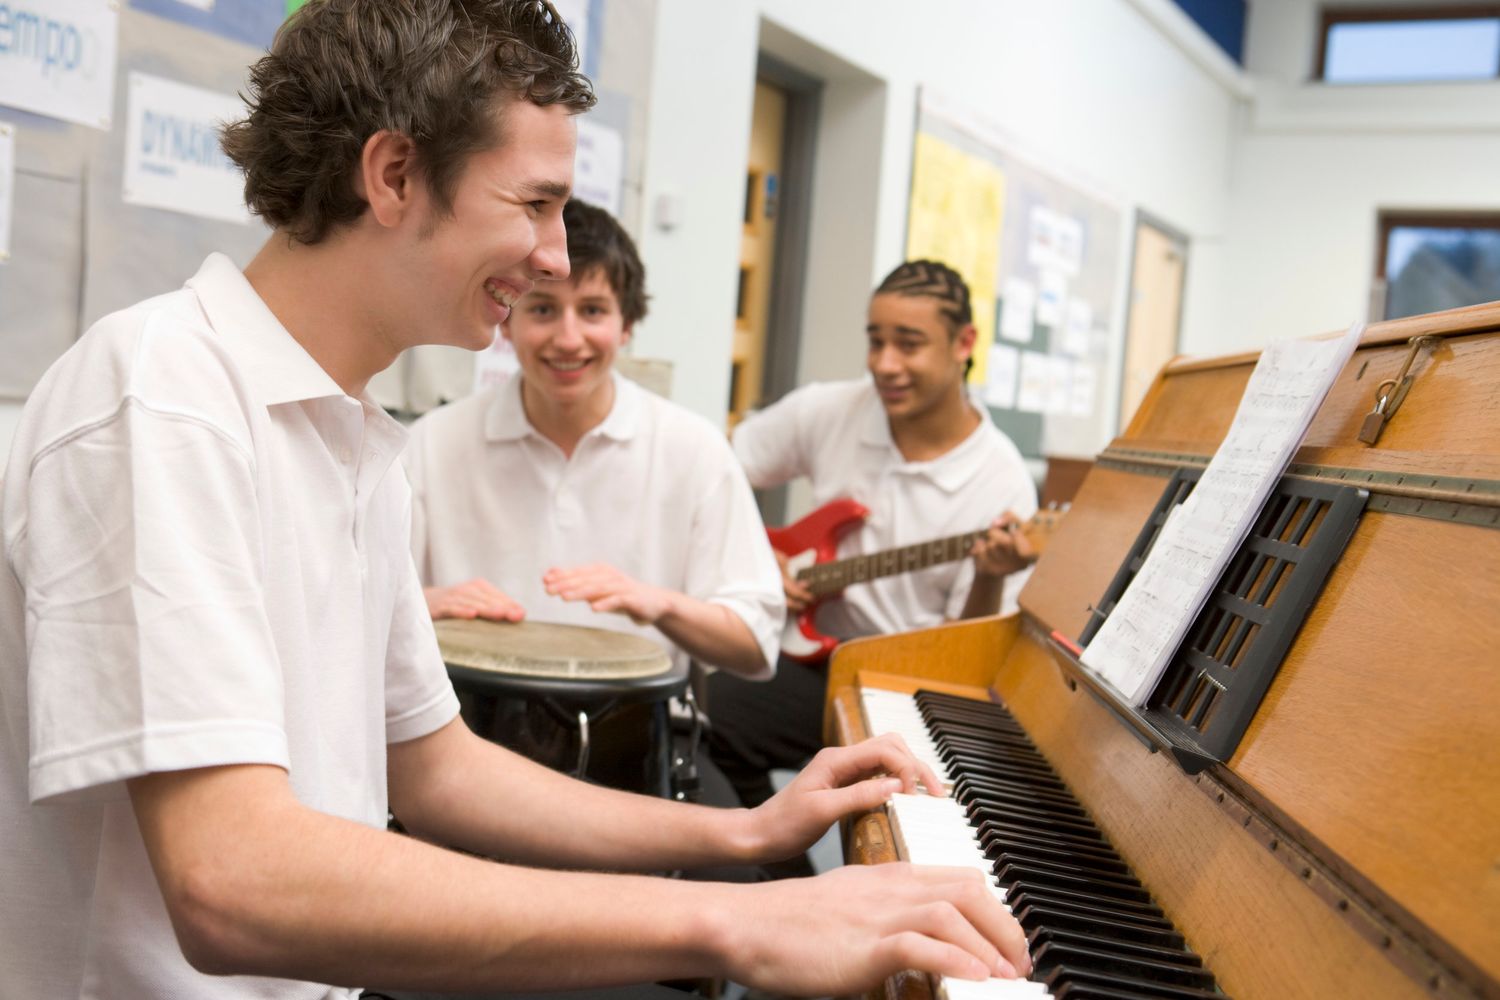 Reasons Why Music Therapy Should Be Available In Schools